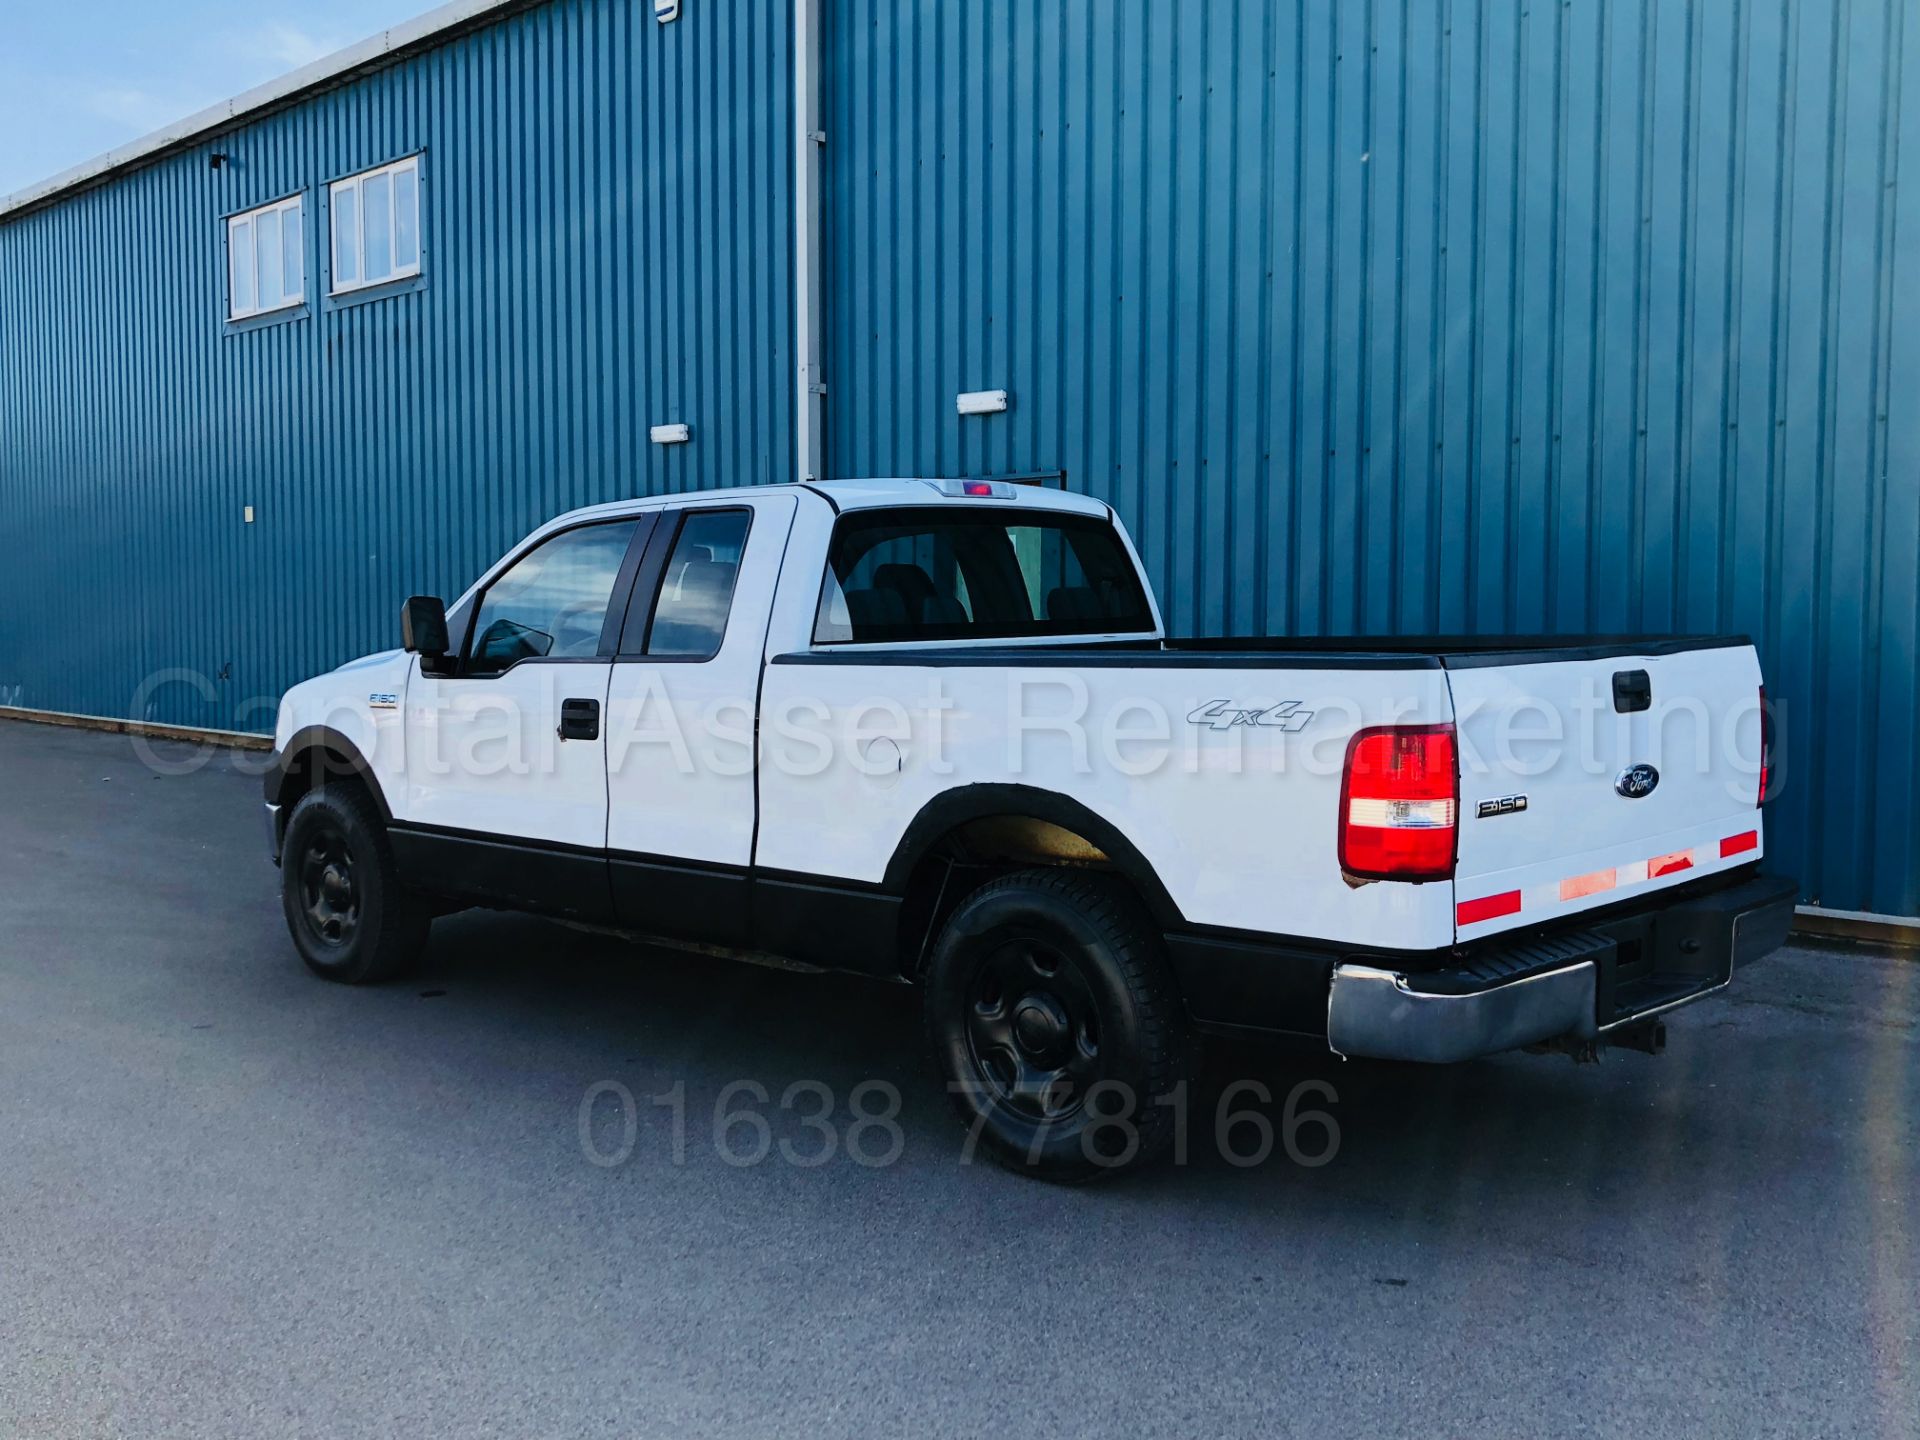 (On Sale) FORD F-150 5.4 TRITON V8 XL EDITION KING-CAB 2008 YEAR**4X4**AUTOMATIC**6 SEATS* - Image 8 of 26